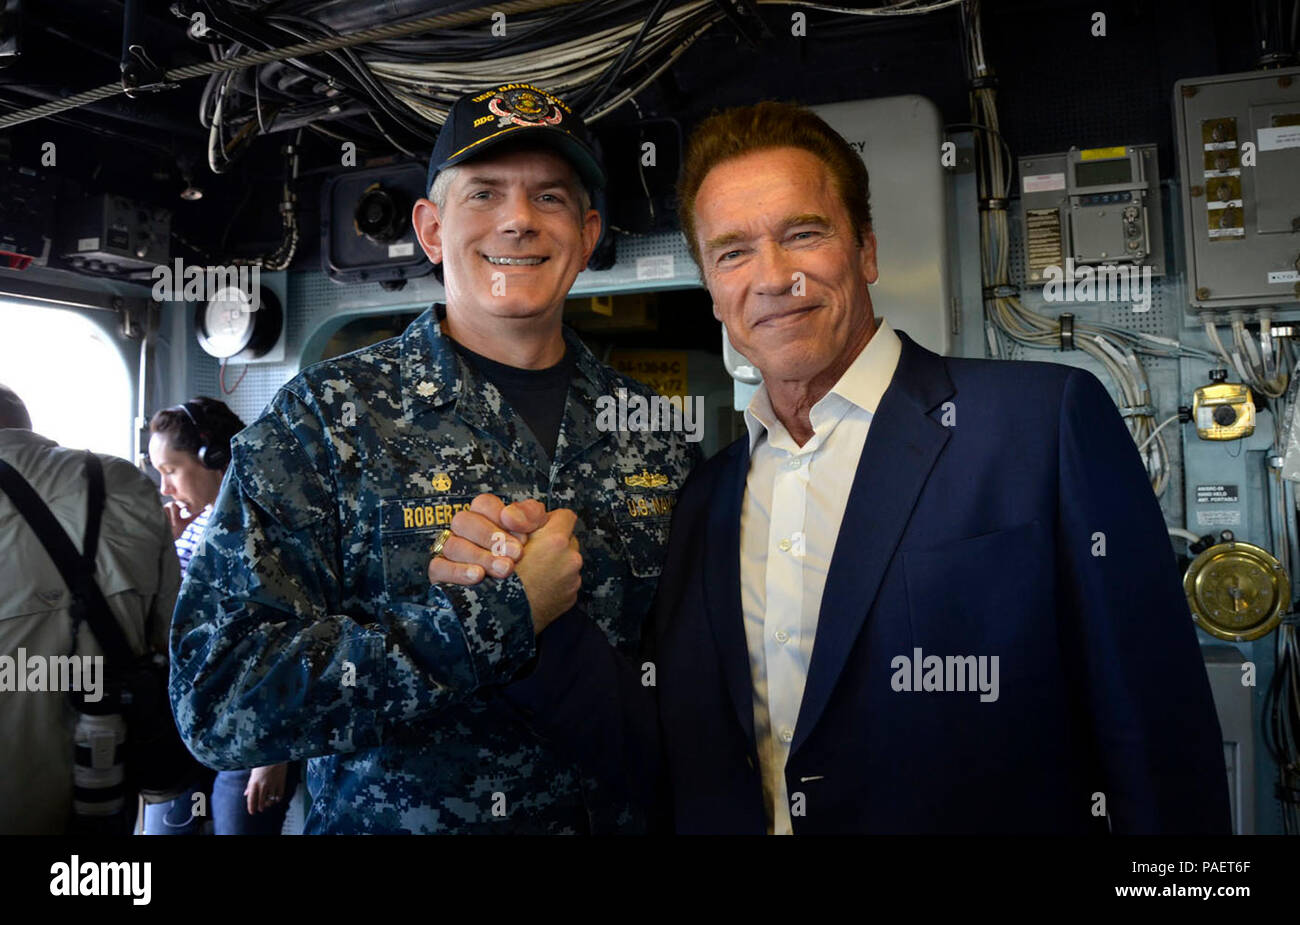 NORFOLK, Va. (June 8, 2016) Former California Governor Arnold Schwarzenegger takes time for a photo with USS Bainbridge (DDG 96) Commanding Officer Cmdr. Martin Robertson aboard the ship, June 8. Schwarzenegger and Assistant Secretary of the Navy for Energy, Installations, and Environment, the Hon. Dennis McGinn visited Naval Station Norfolk for the filming of a National Geographic documentary about the sea-level rise impact to the Navy called “Years of Living Dangerously,” which is scheduled to air in November. Stock Photo